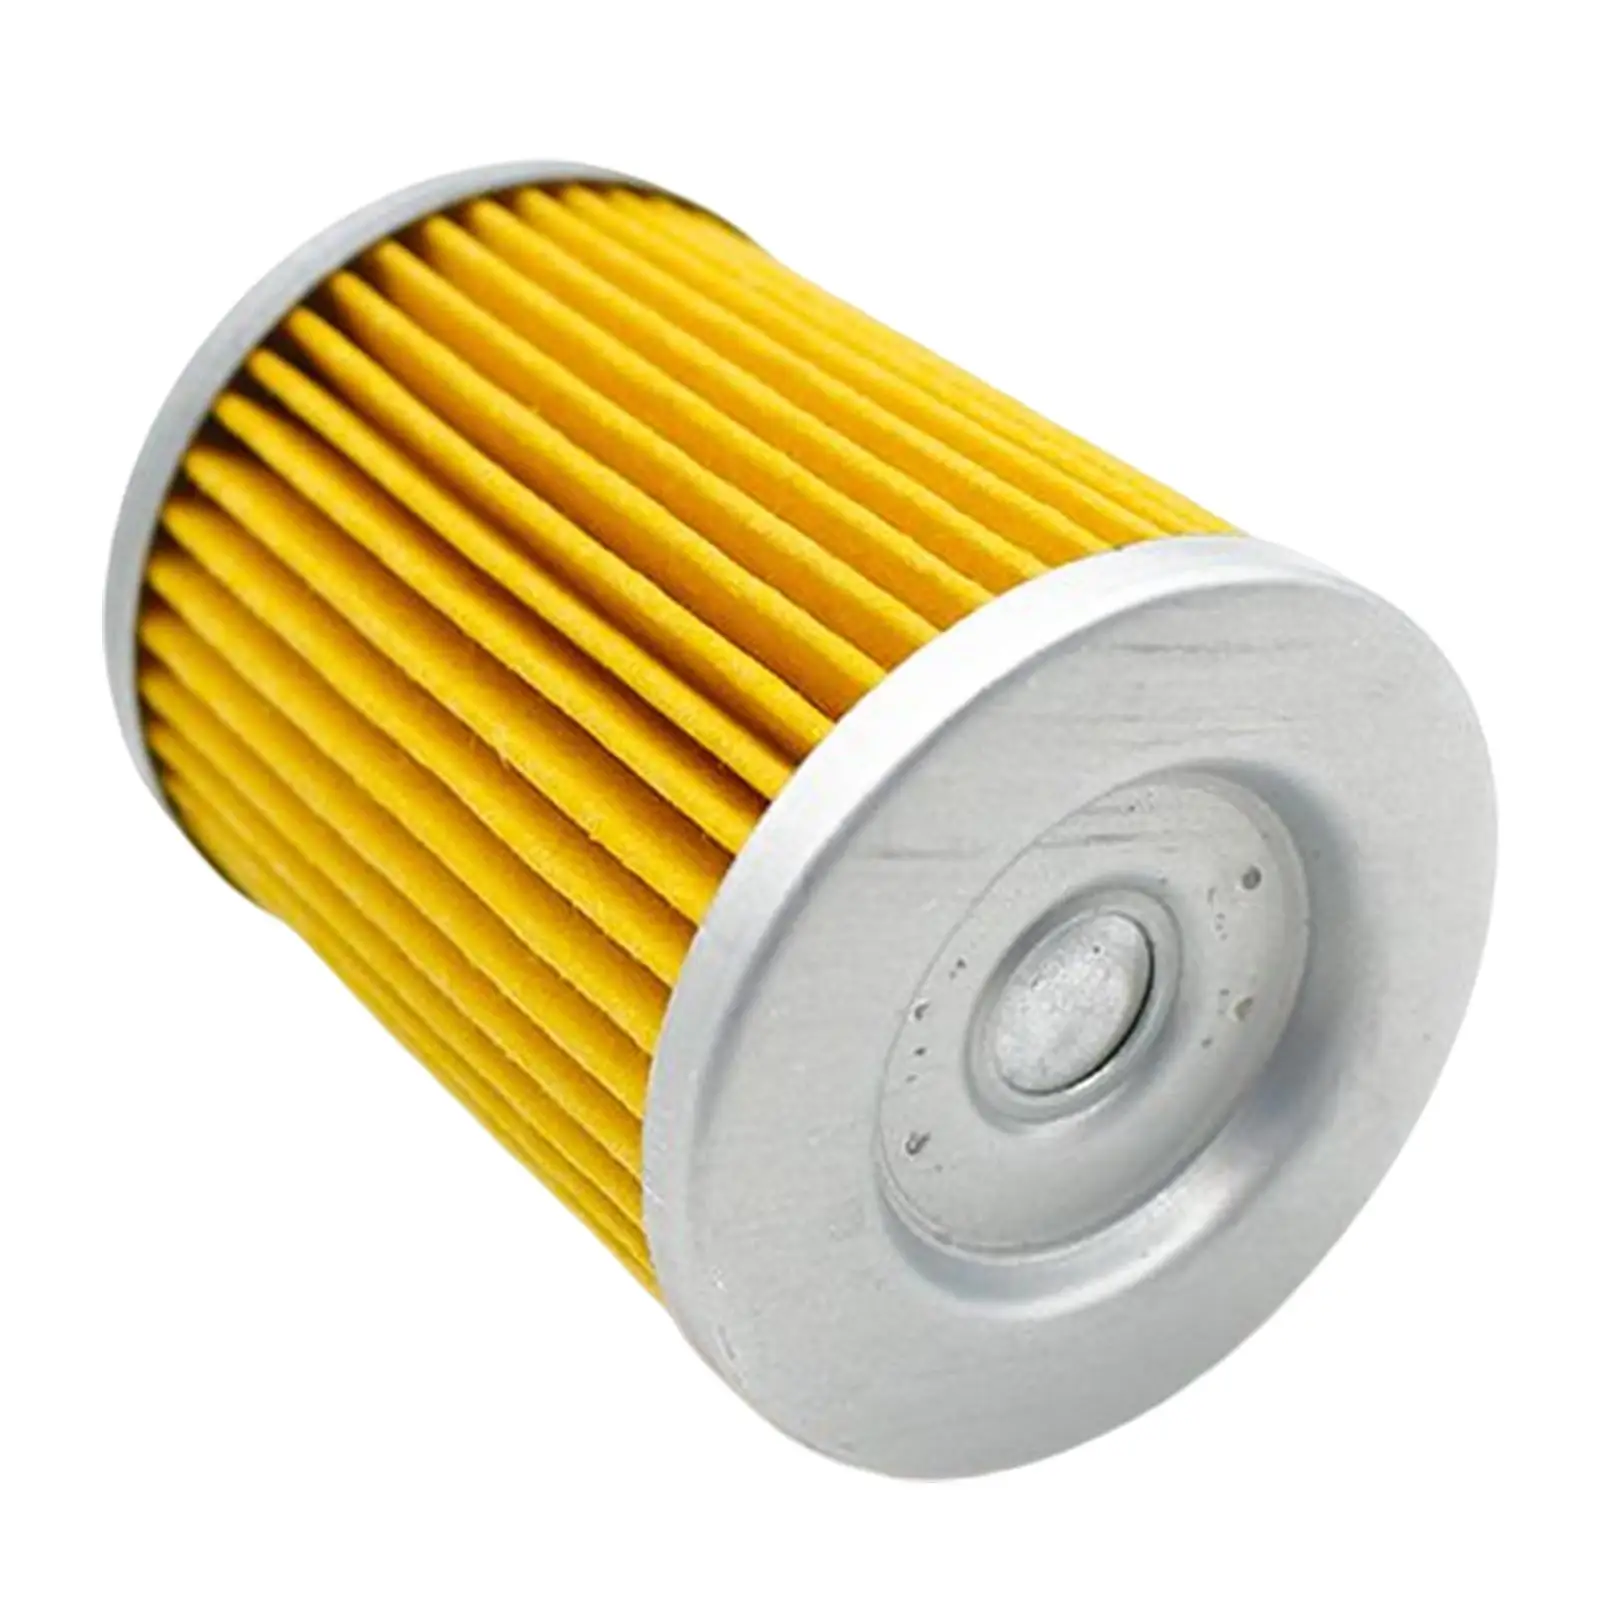 Motorcycle Oil Filter Replace Parts for 250 300 YP400 AN 250 Majesty Klx125 Durable Premium